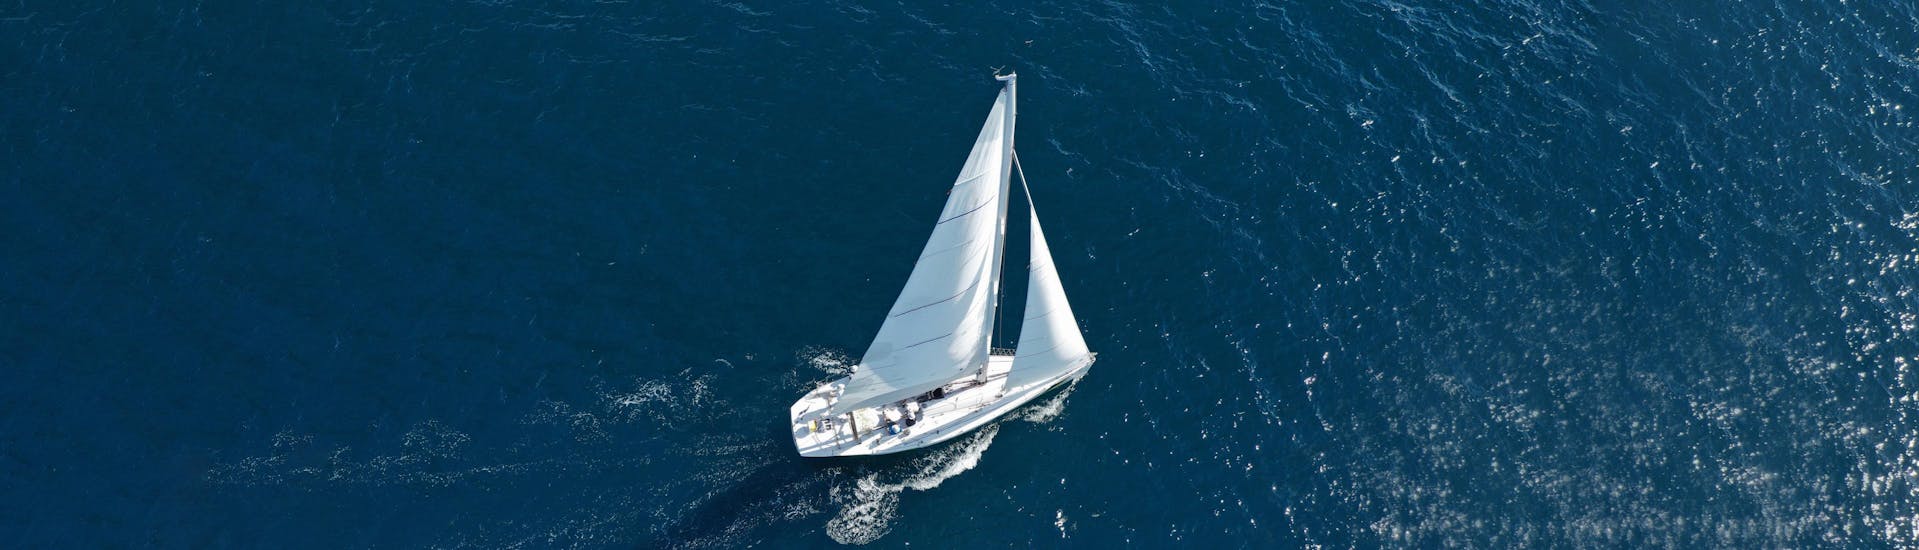 Take a sailing tour and let the wind take you to unique locations